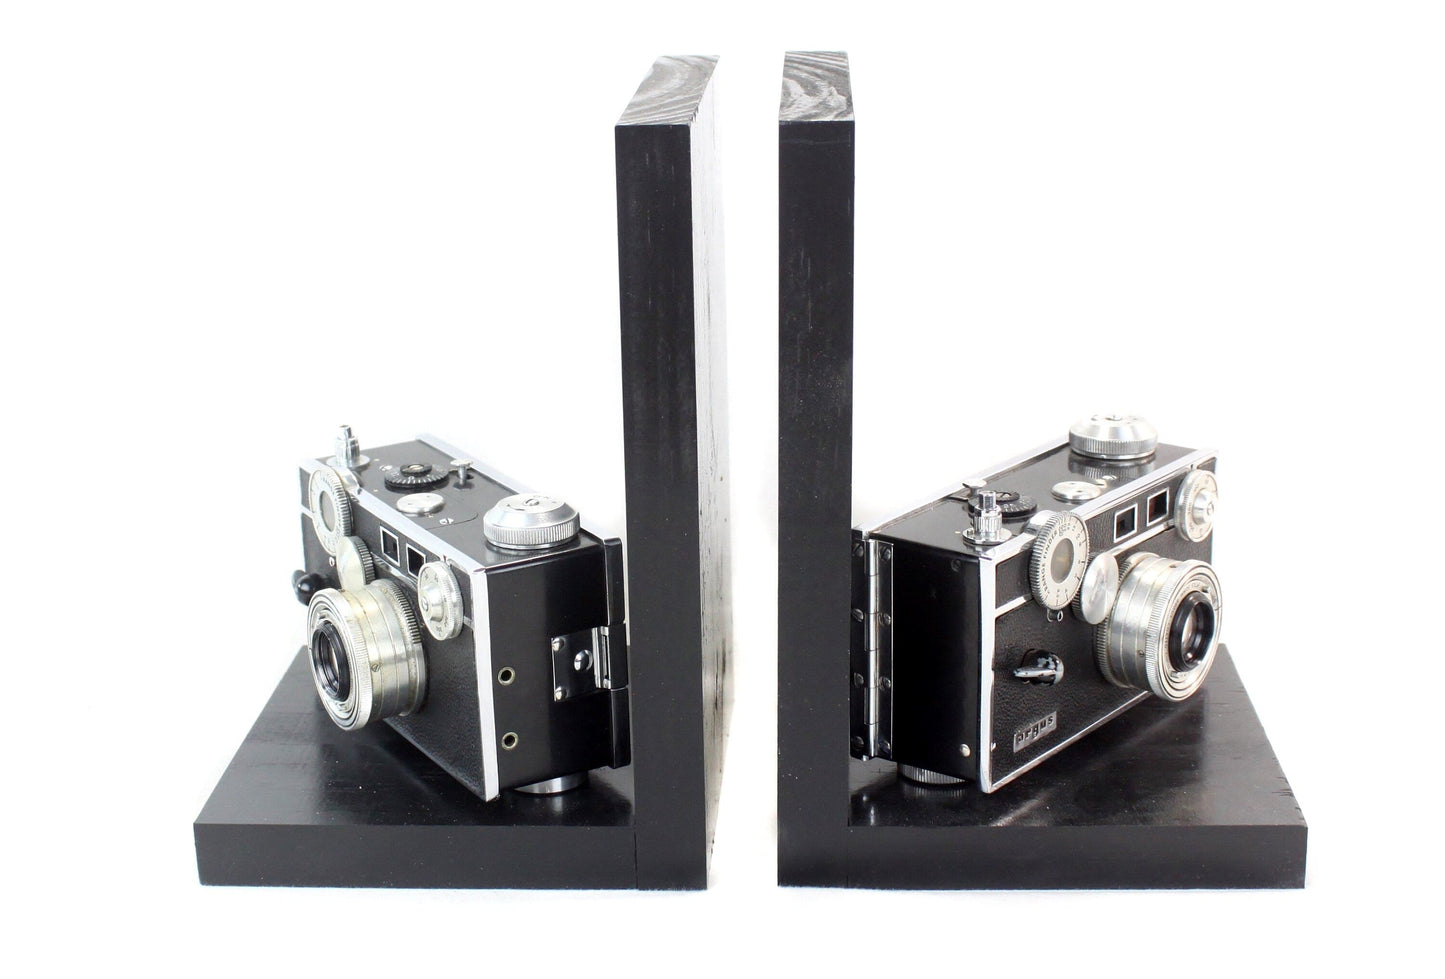 LightAndTimeArt Bookends Antique Decorative Camera Bookends, Argus C3, Home Theater Décor, Movie Room, DVD Holder, Vintage, Ecofriendly Gift